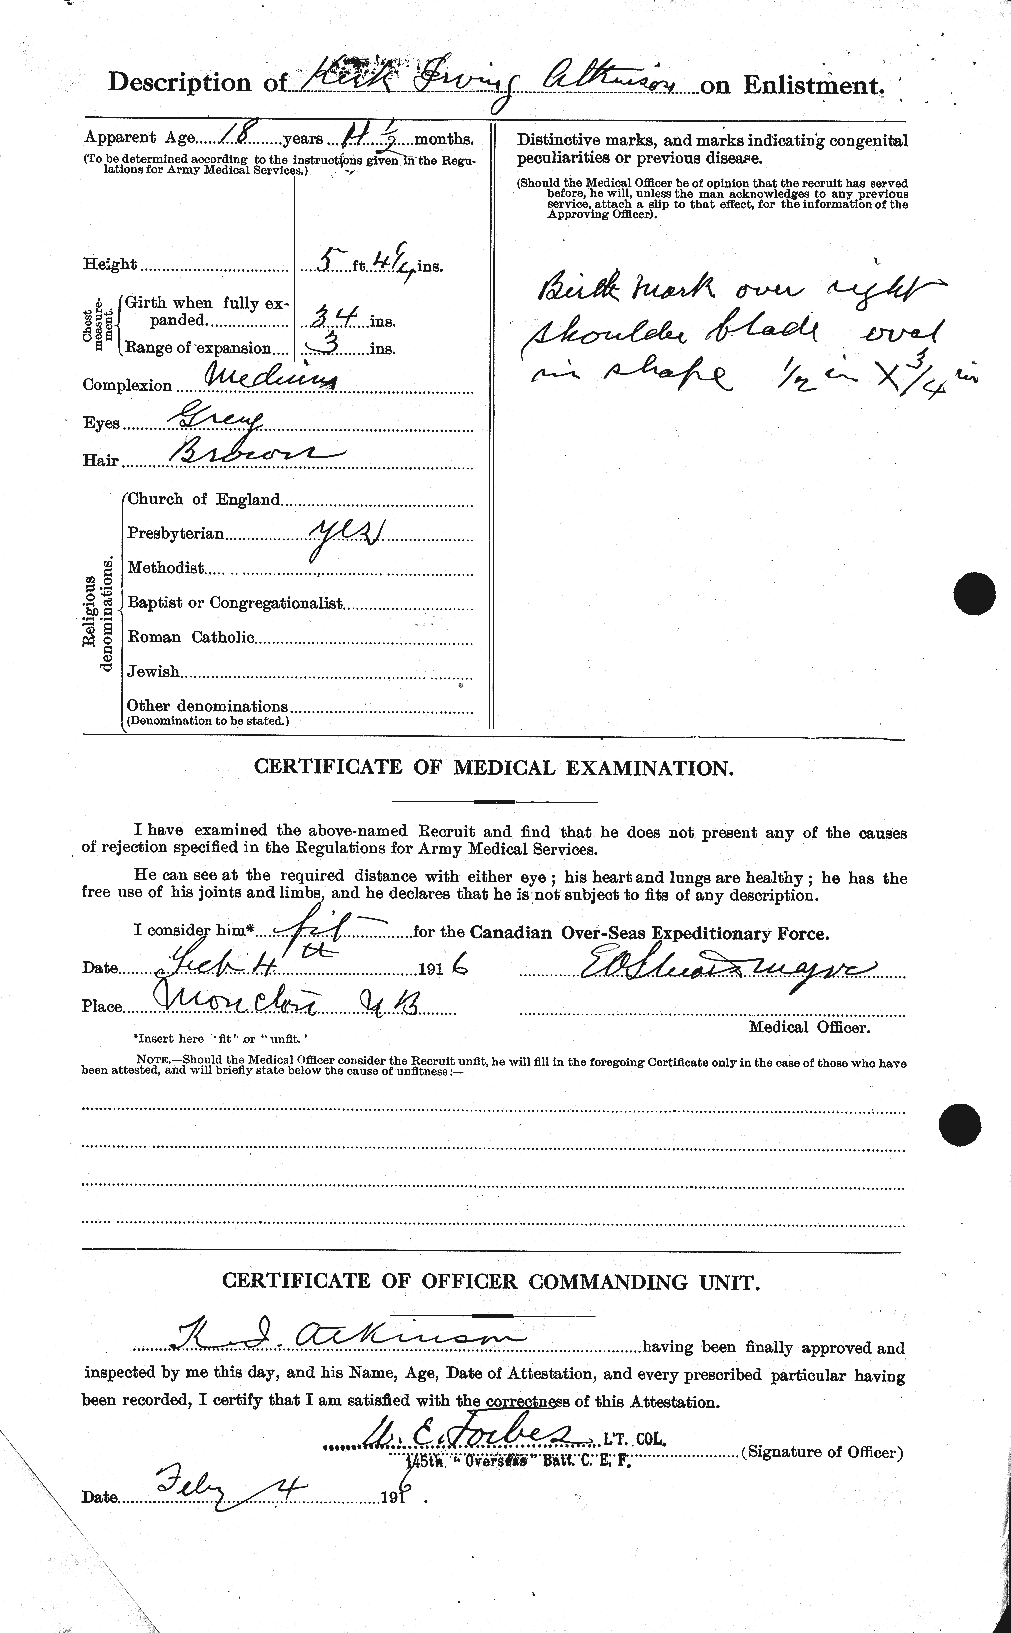 Personnel Records of the First World War - CEF 217281b